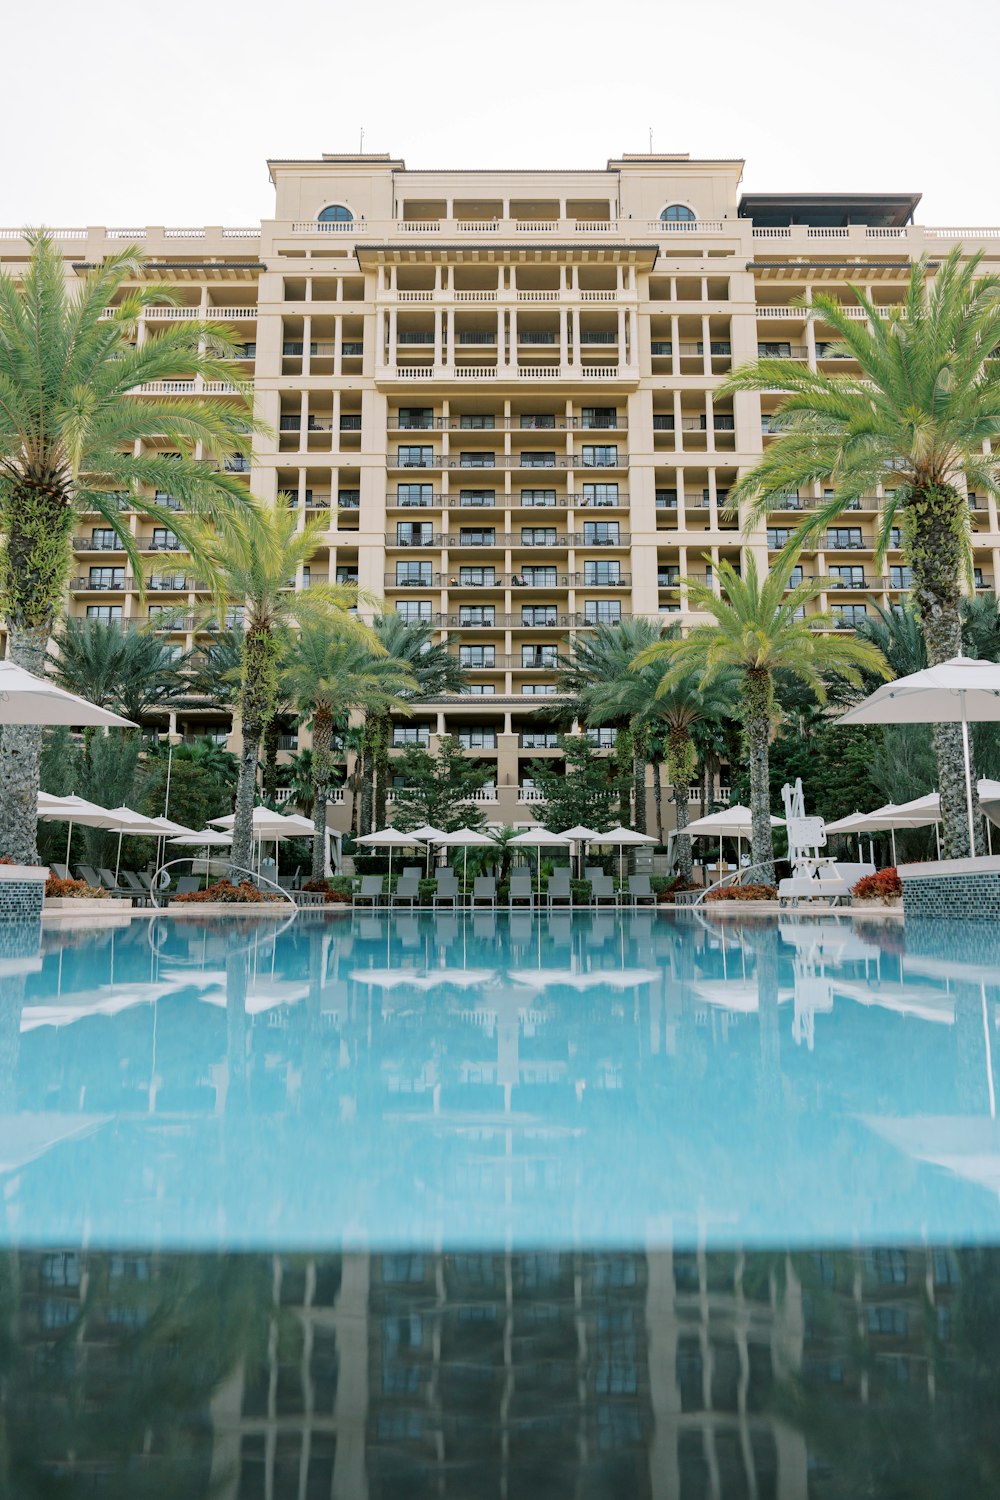 a large hotel with a pool surrounded by palm trees